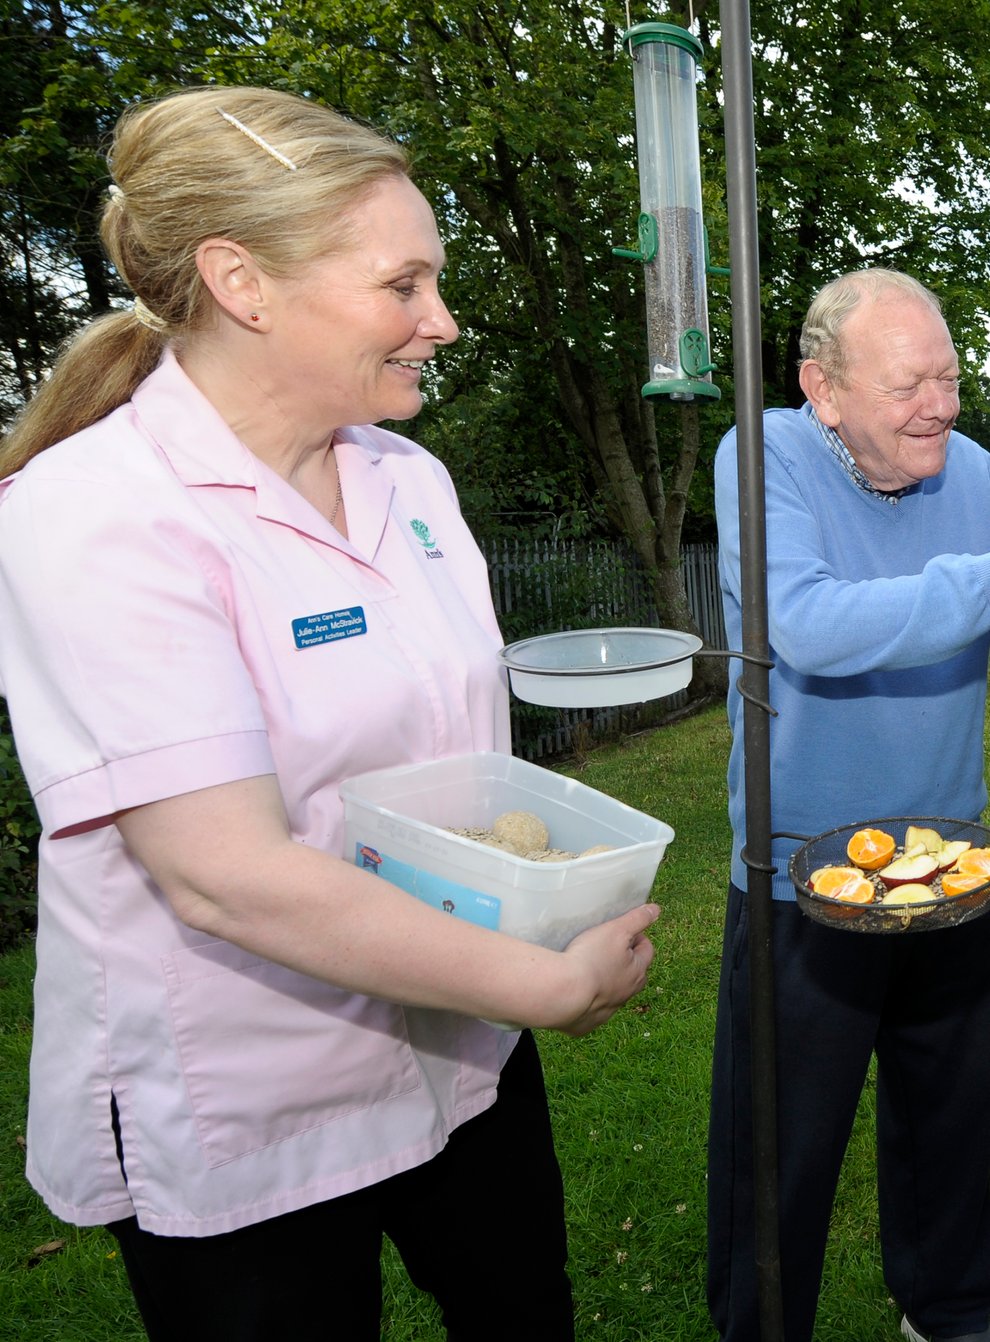 (l-r) Julie-Ann McStravick, care home residents Bob Richardson and David Duprey and Peter Harper of the Lough Neagh Partnership fill one of the bird feeders(Edward Byrne/PA)